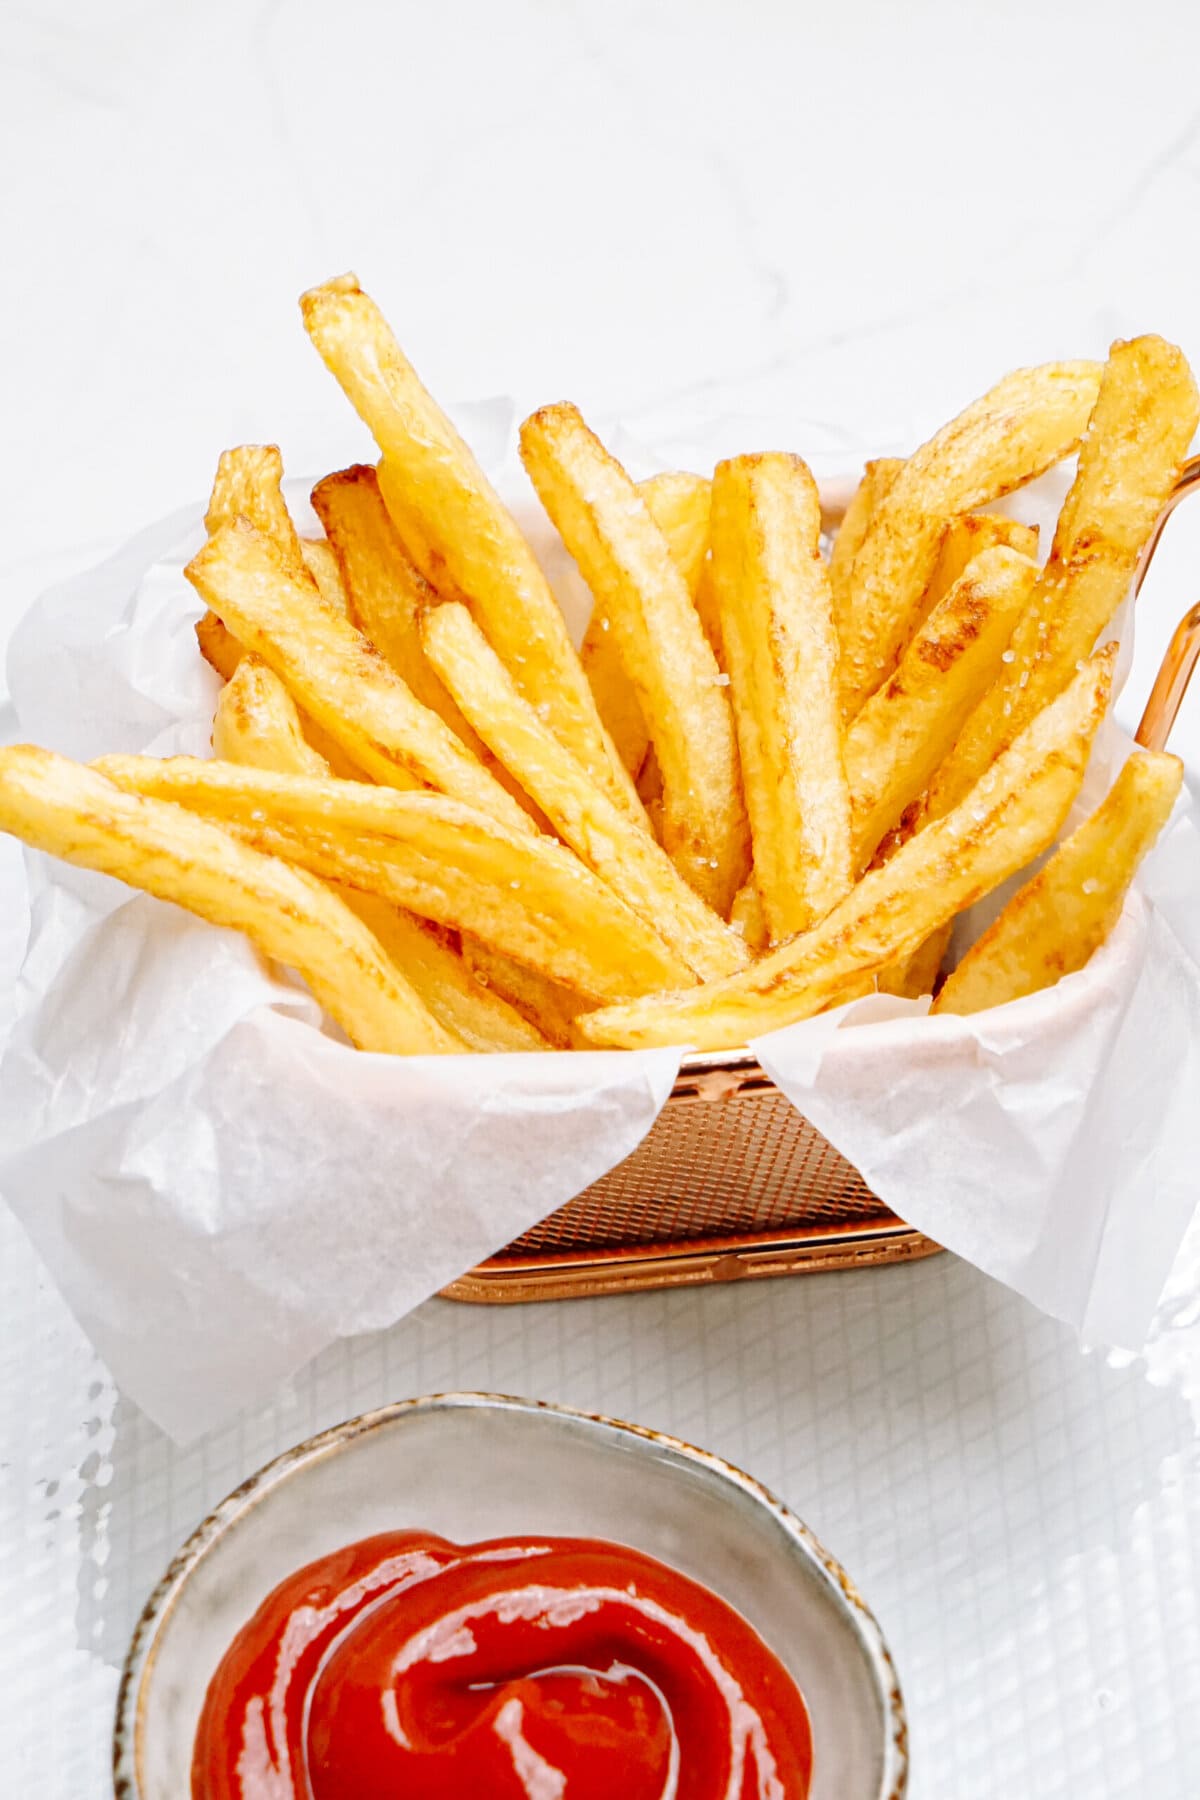 pomme frites arranged in wax paper with a little cup of ketchup